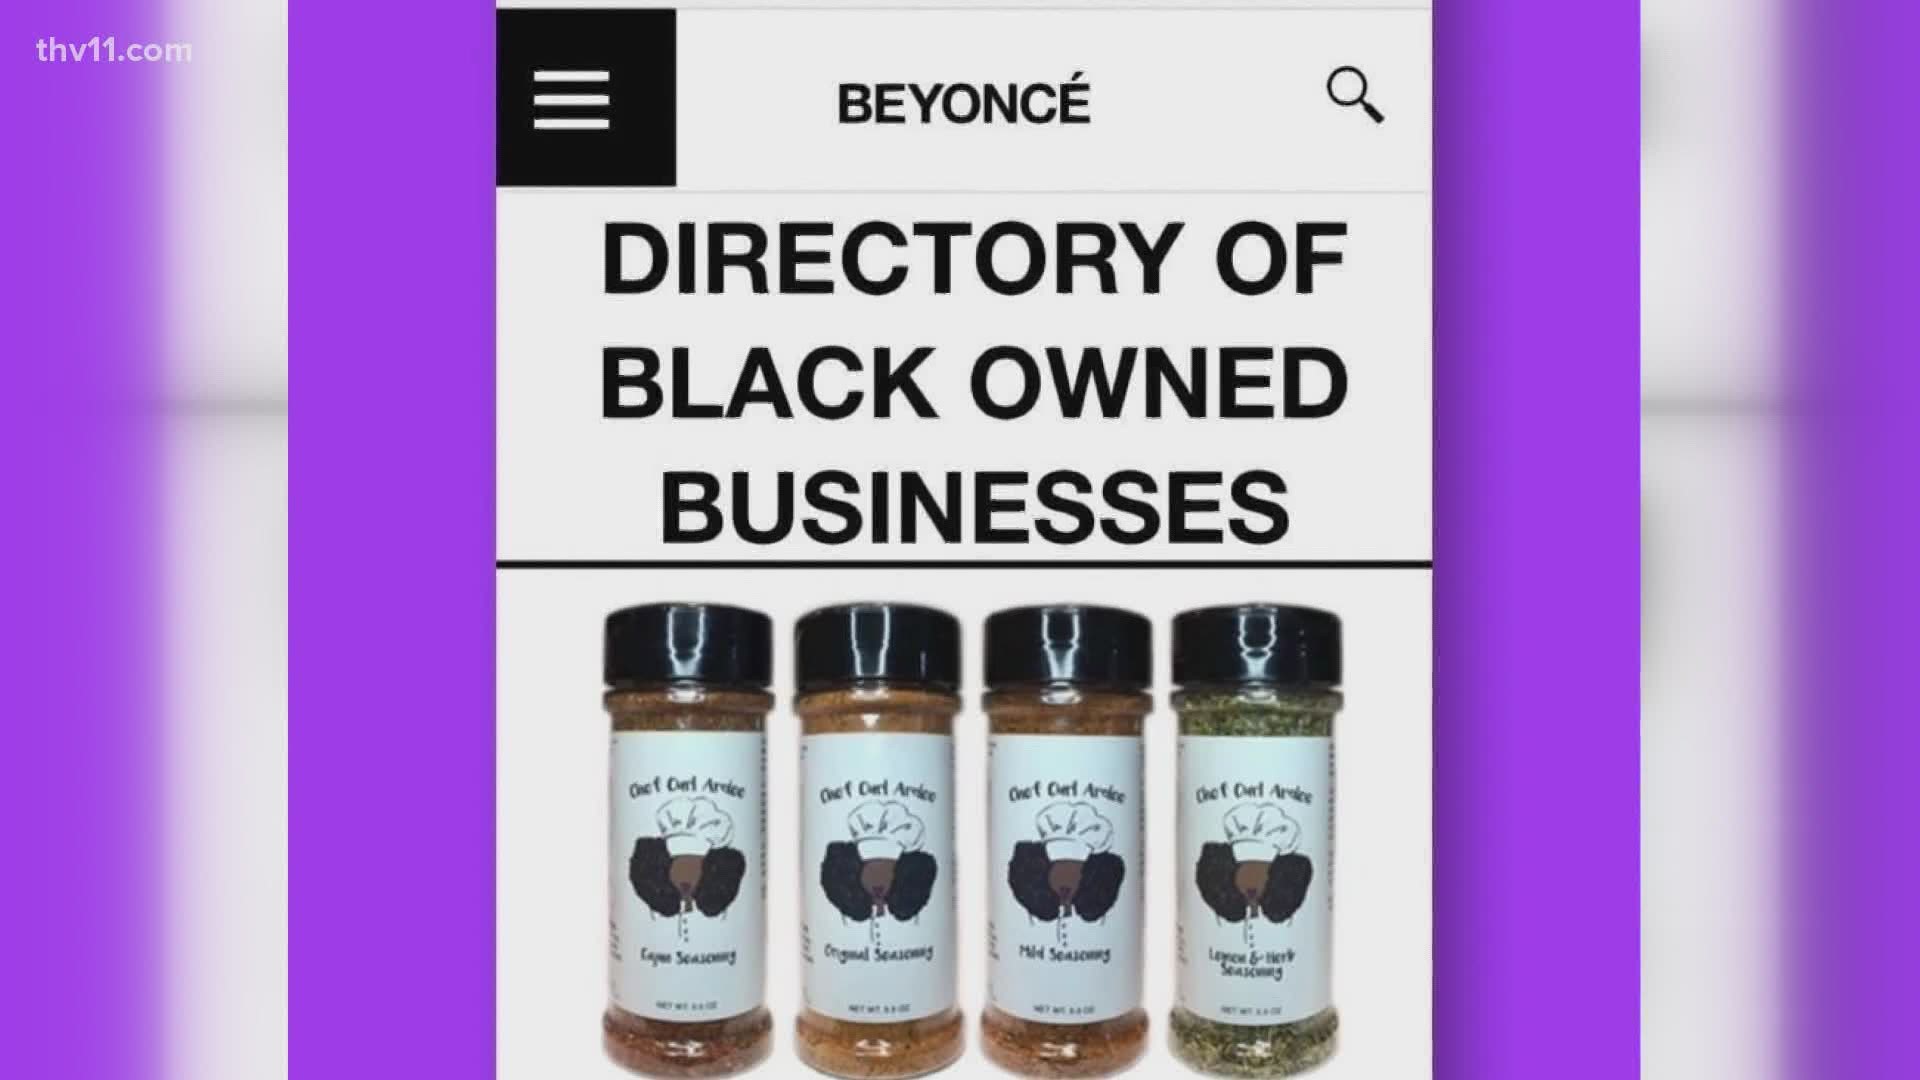 A UCA grad is getting unexpected recognition from music icon Beyoncé. The singer did a campaign roll-out on her website, highlighting black business owners.